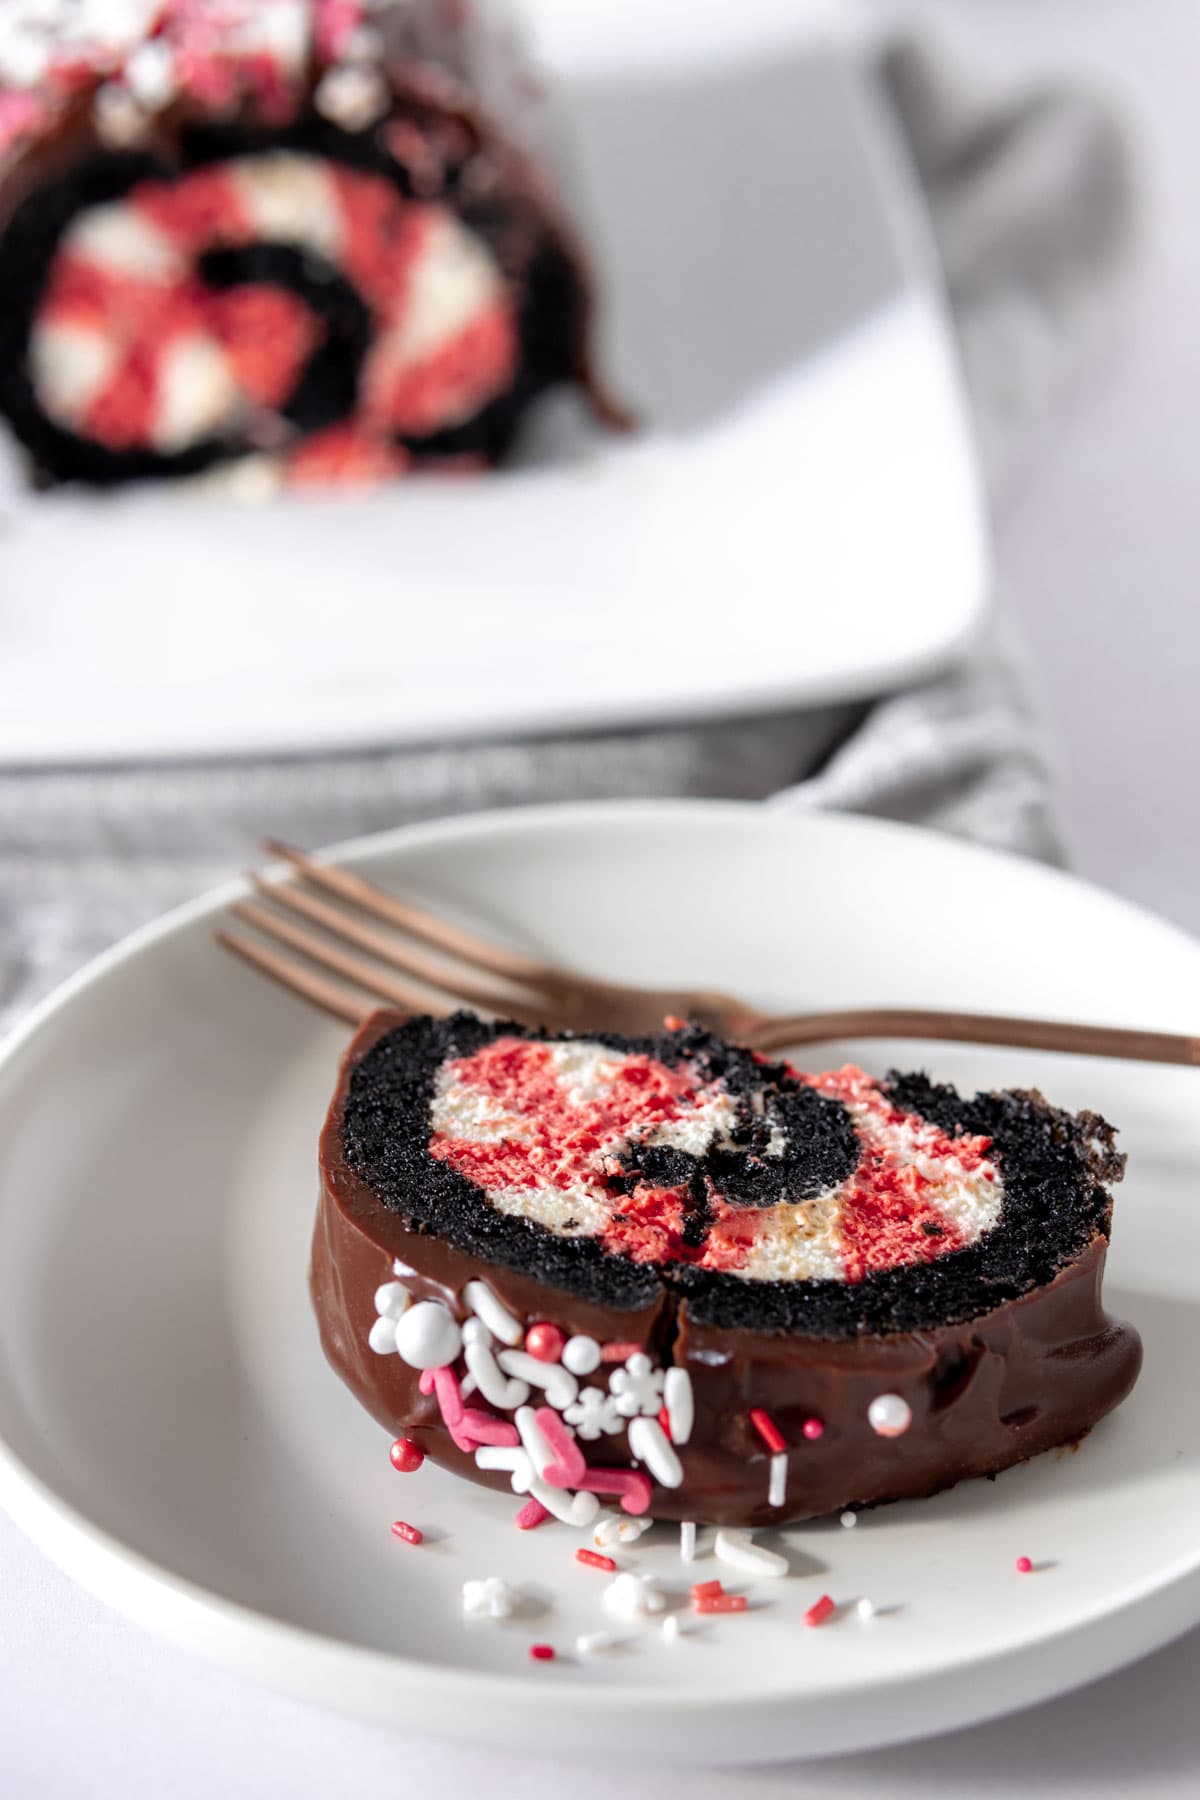 Chocolate roll cake slice filled with red and white cream and sprinkled with red and white sugar sprinkles